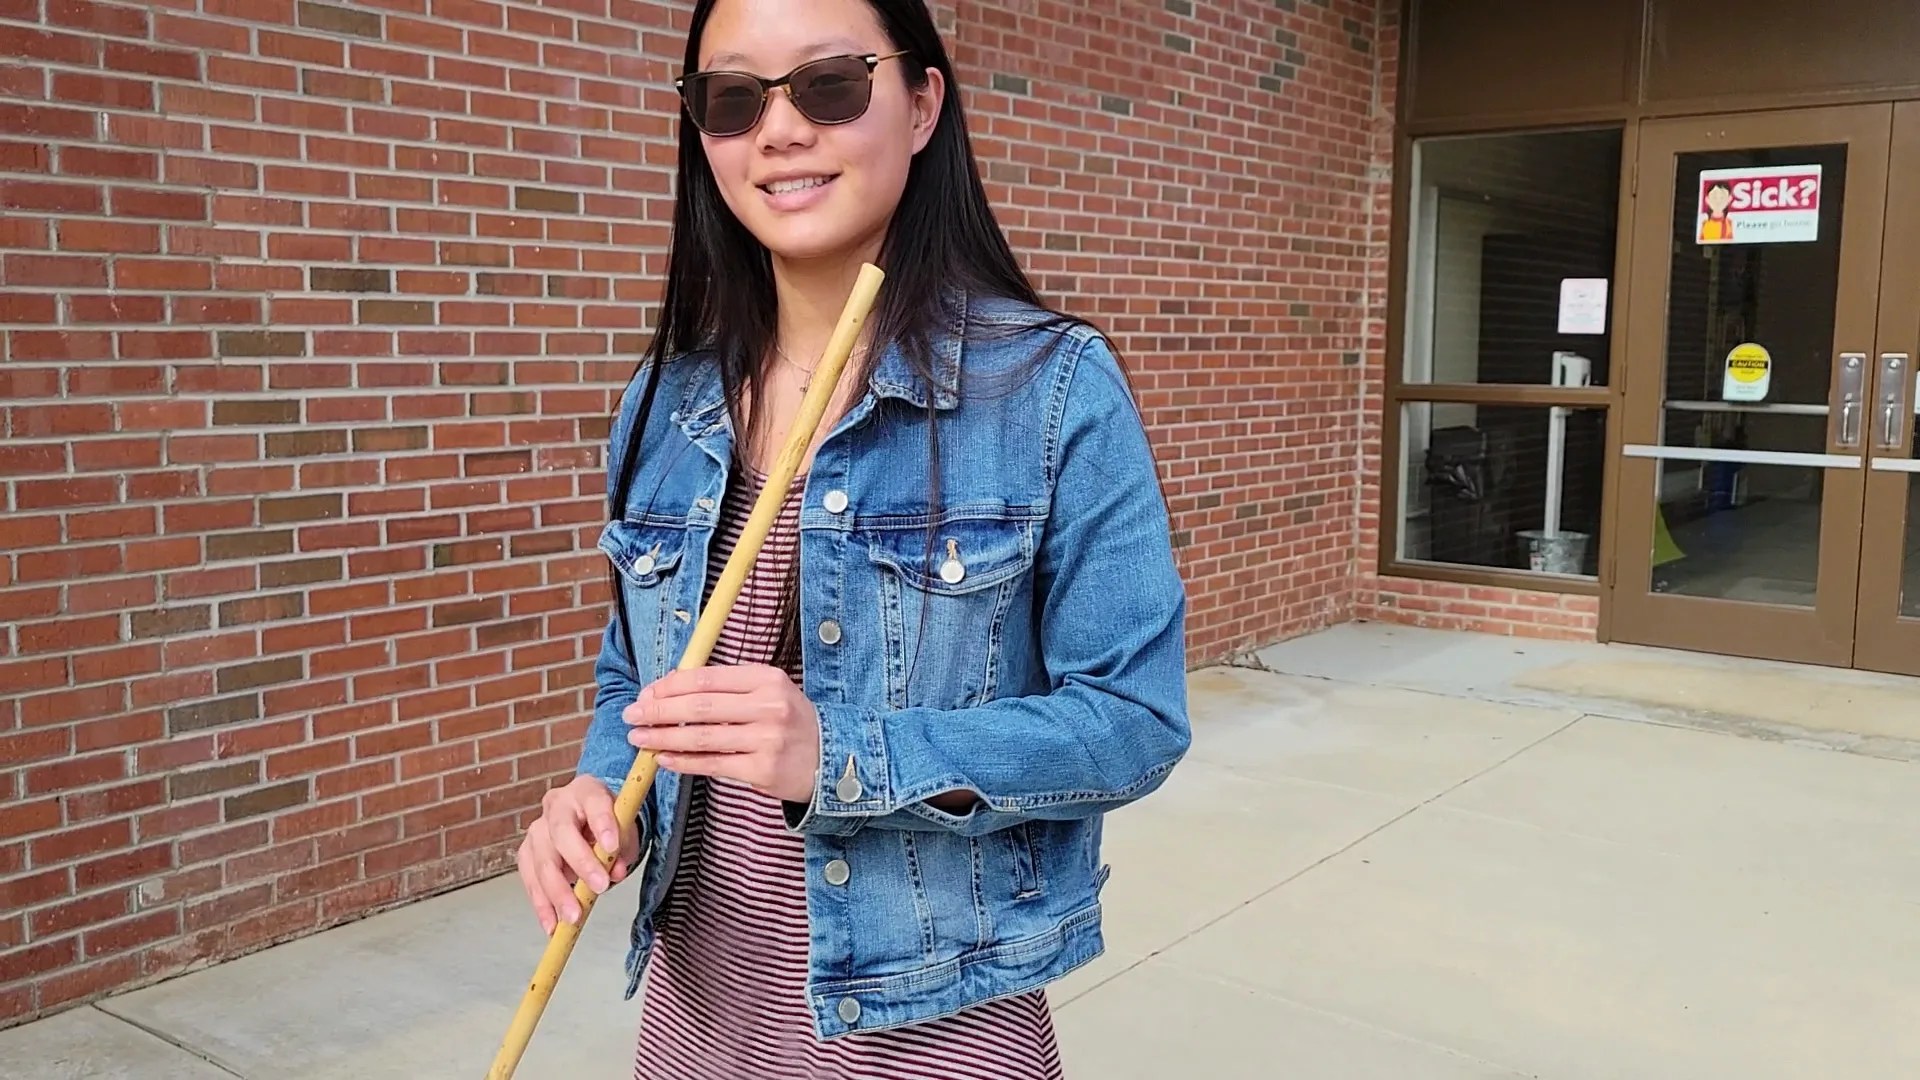 Photo of a woman with long dark hair wearing sunglasses and holding a river cane stick.